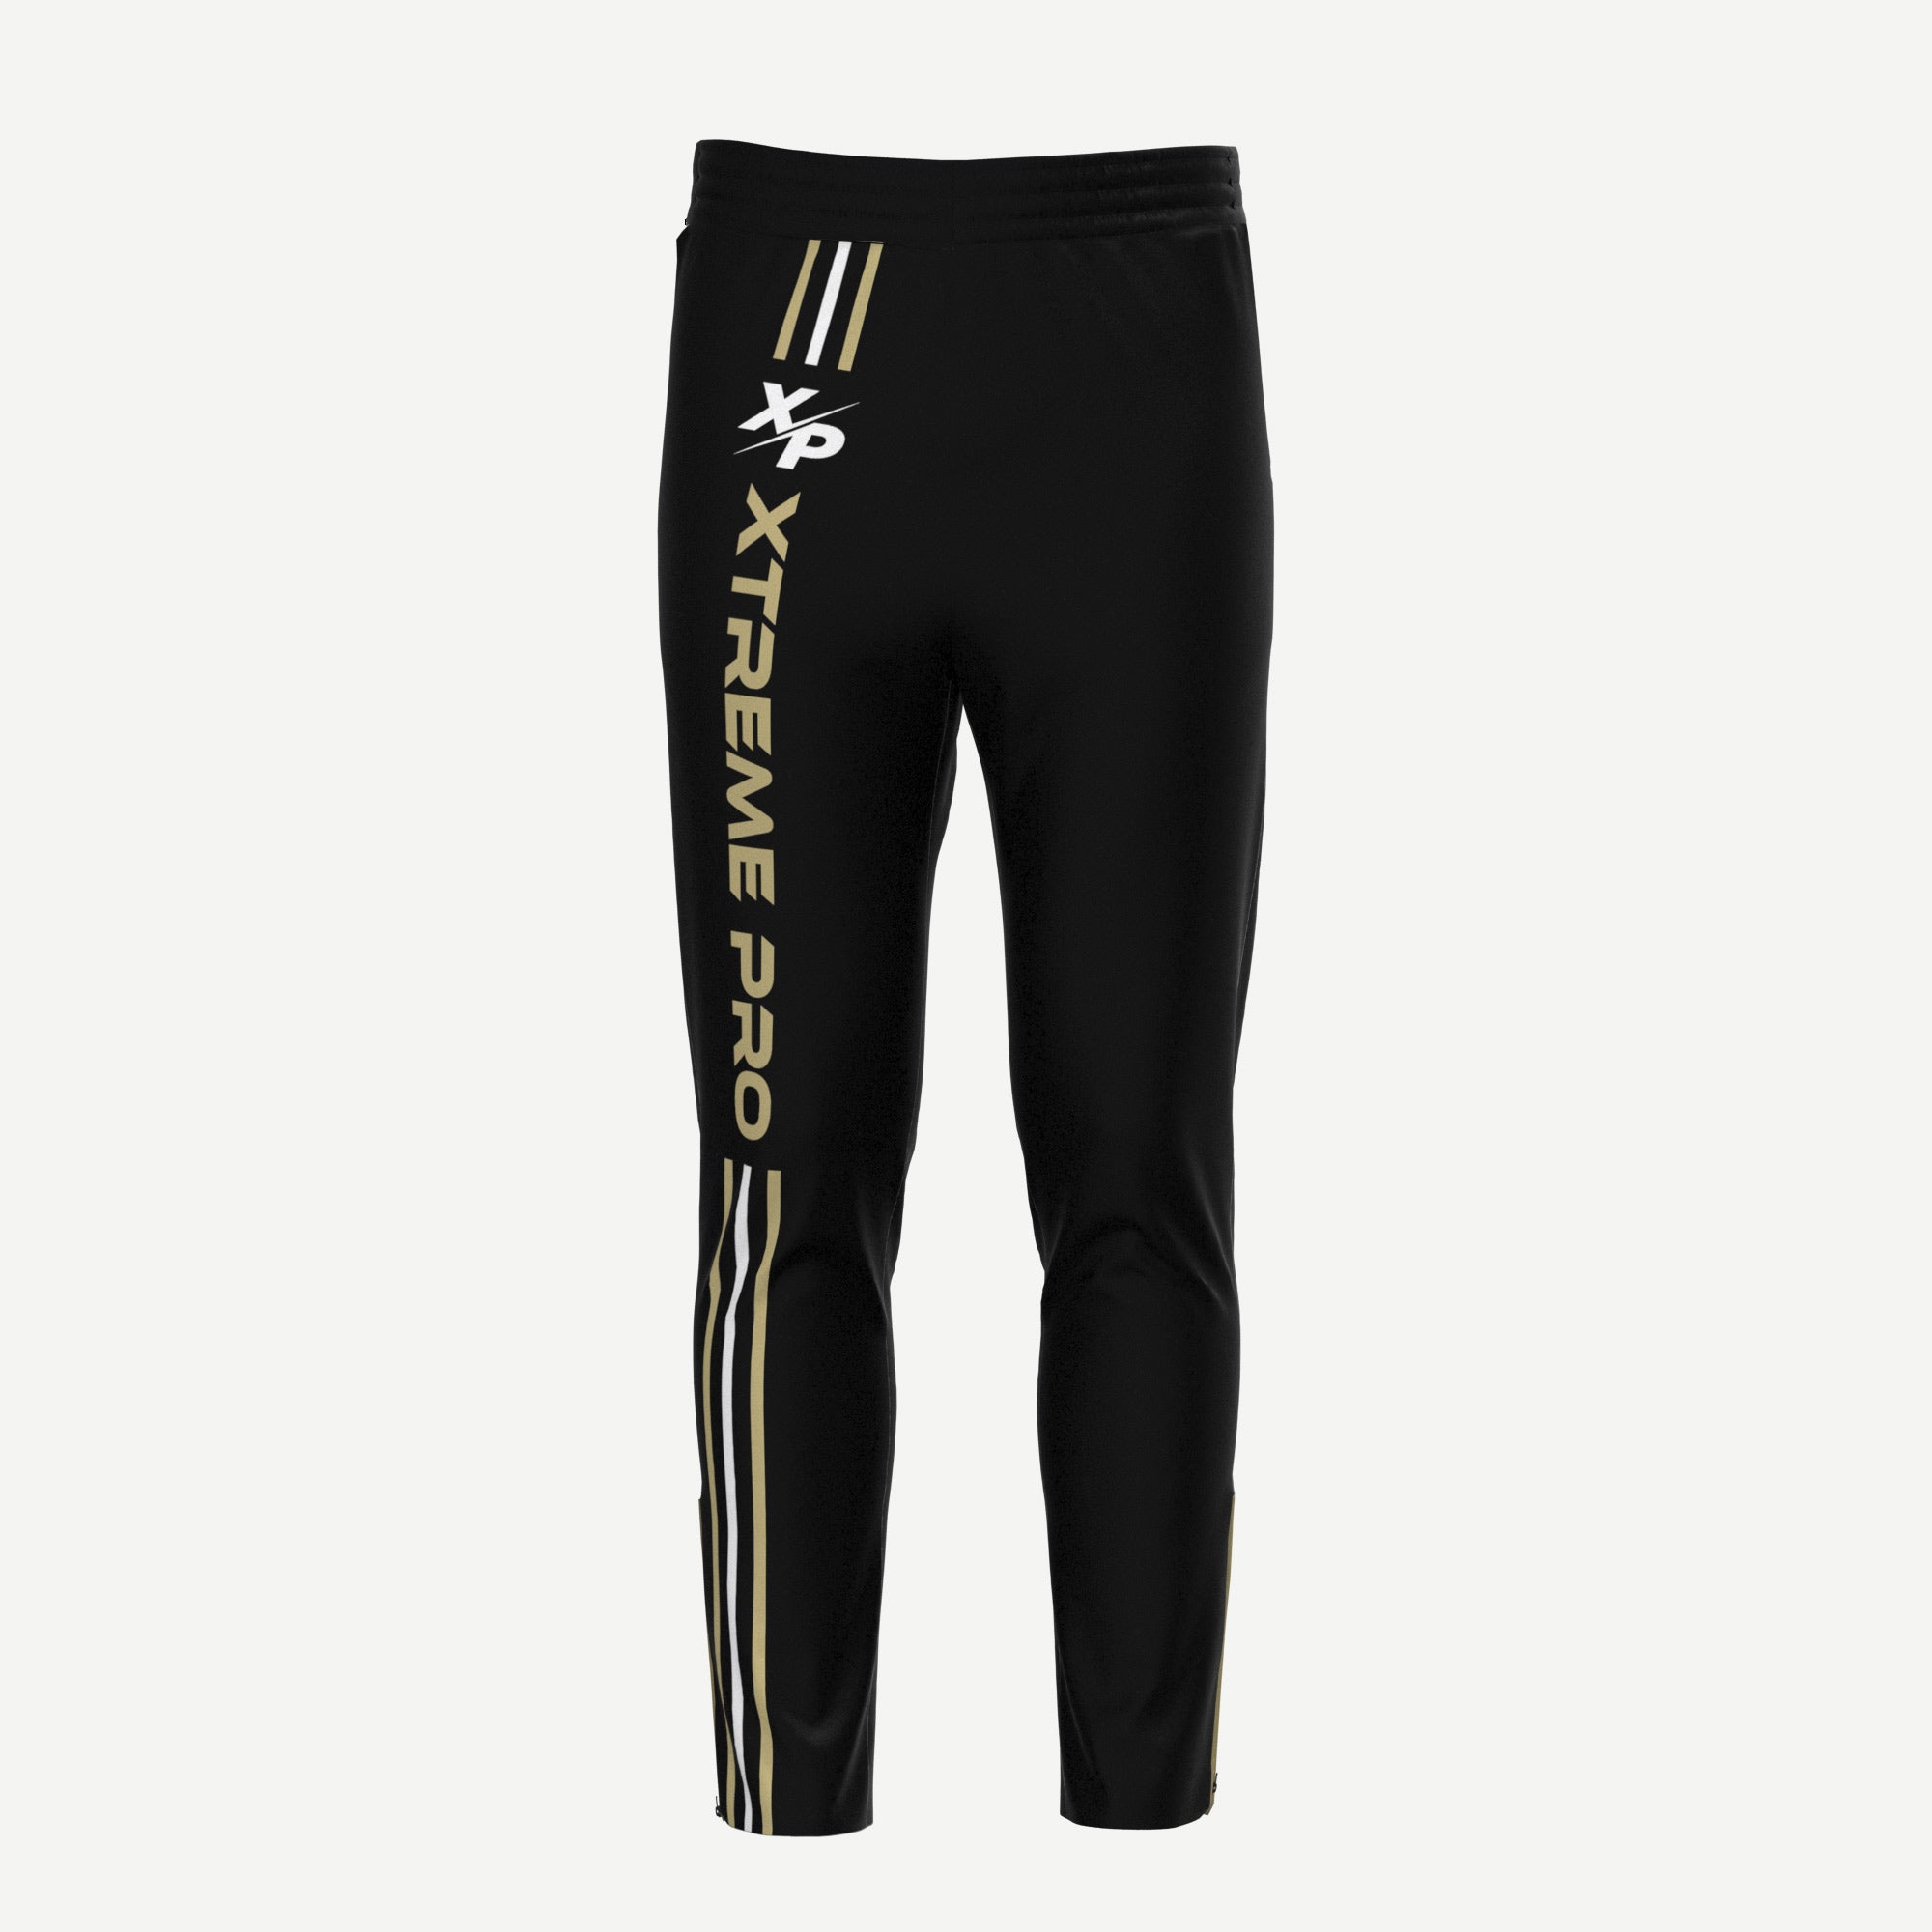 Vegas Gold Elite Fully Sublimated Sweatpants w- Pockets & Side Zippers Xtreme Pro Apparel